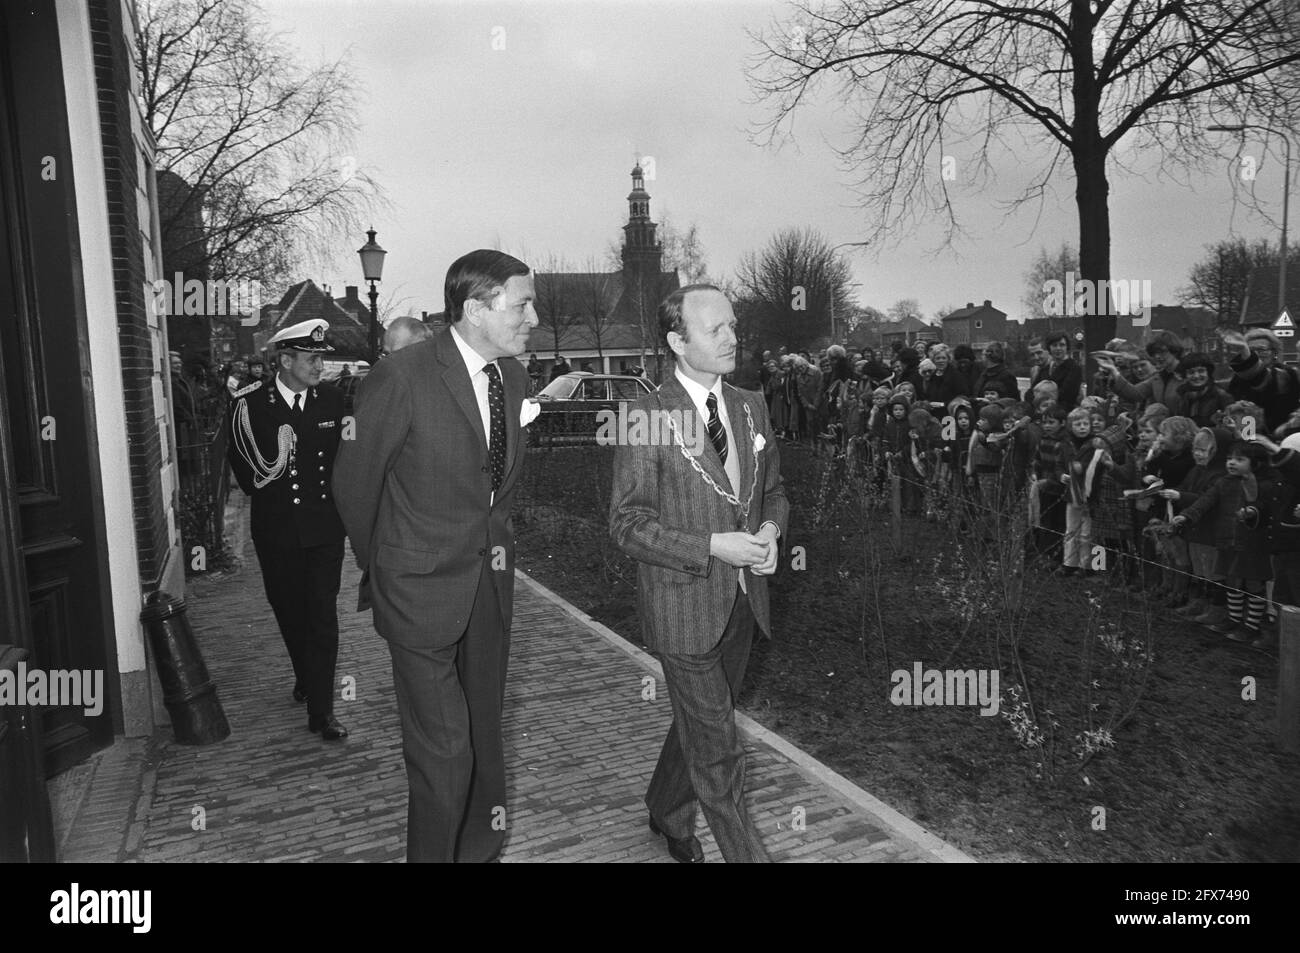 Prince Claus and the mayor of Haastrecht Mr. Kees van der Linden, March 25, 1977, mayors, openings, princes, The Netherlands, 20th century press agency photo, news to remember, documentary, historic photography 1945-1990, visual stories, human history of the Twentieth Century, capturing moments in time Stock Photo